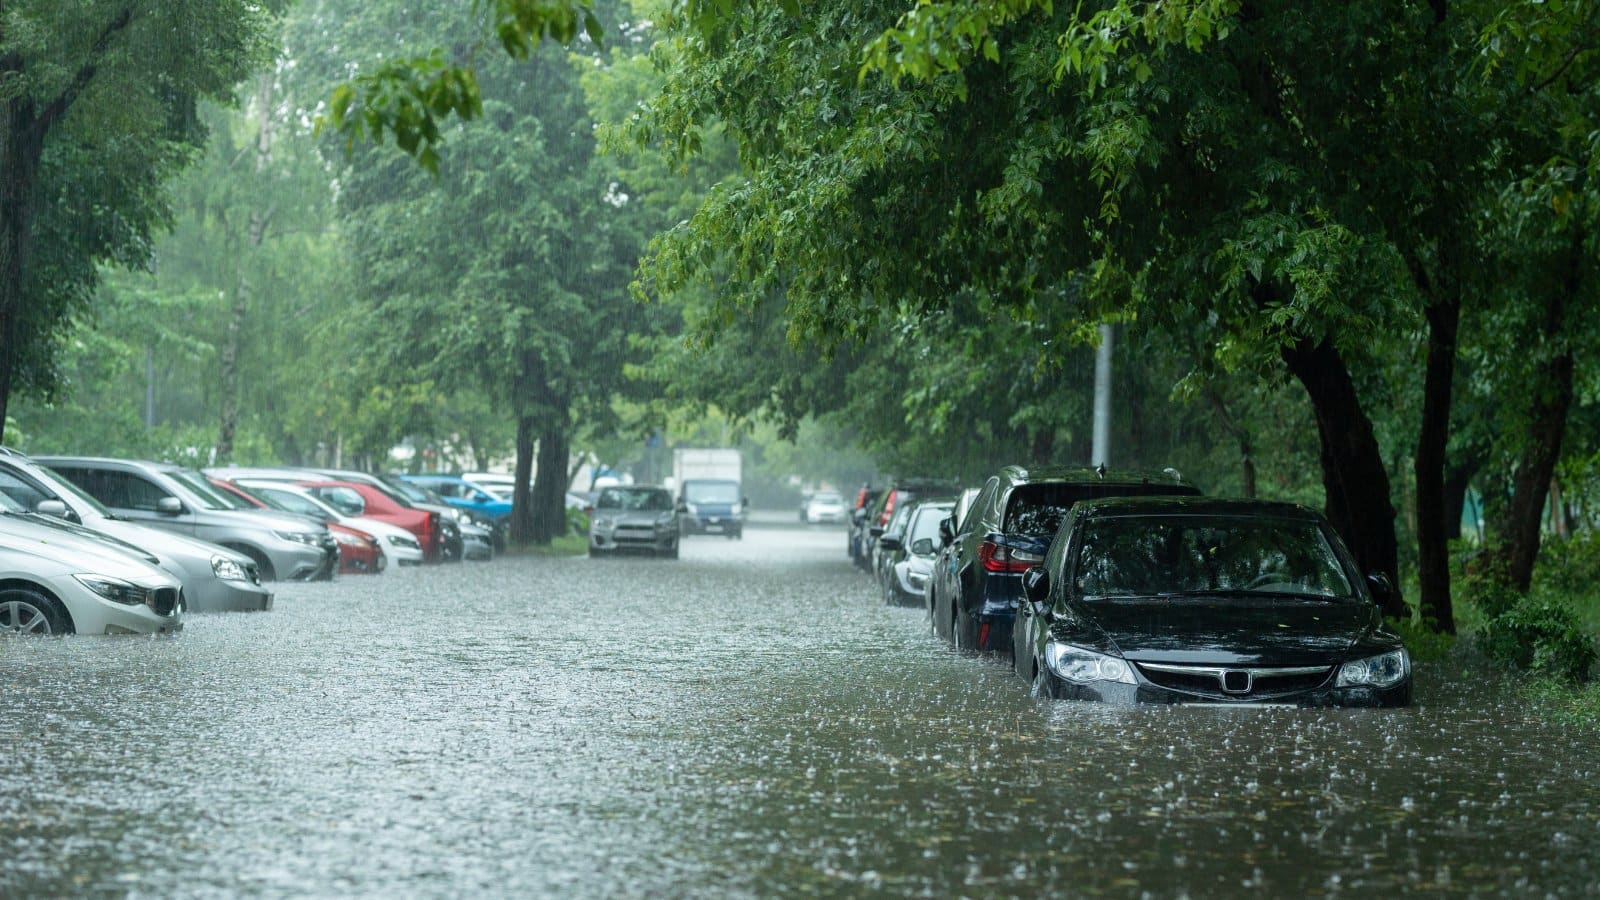 Image Credit: Shutterstock / mkfilm <p>With climate change, regions like Southeast Asia and the Caribbean are experiencing more frequent hurricanes and floods. Be aware of seasonal weather patterns prior to travel.</p>